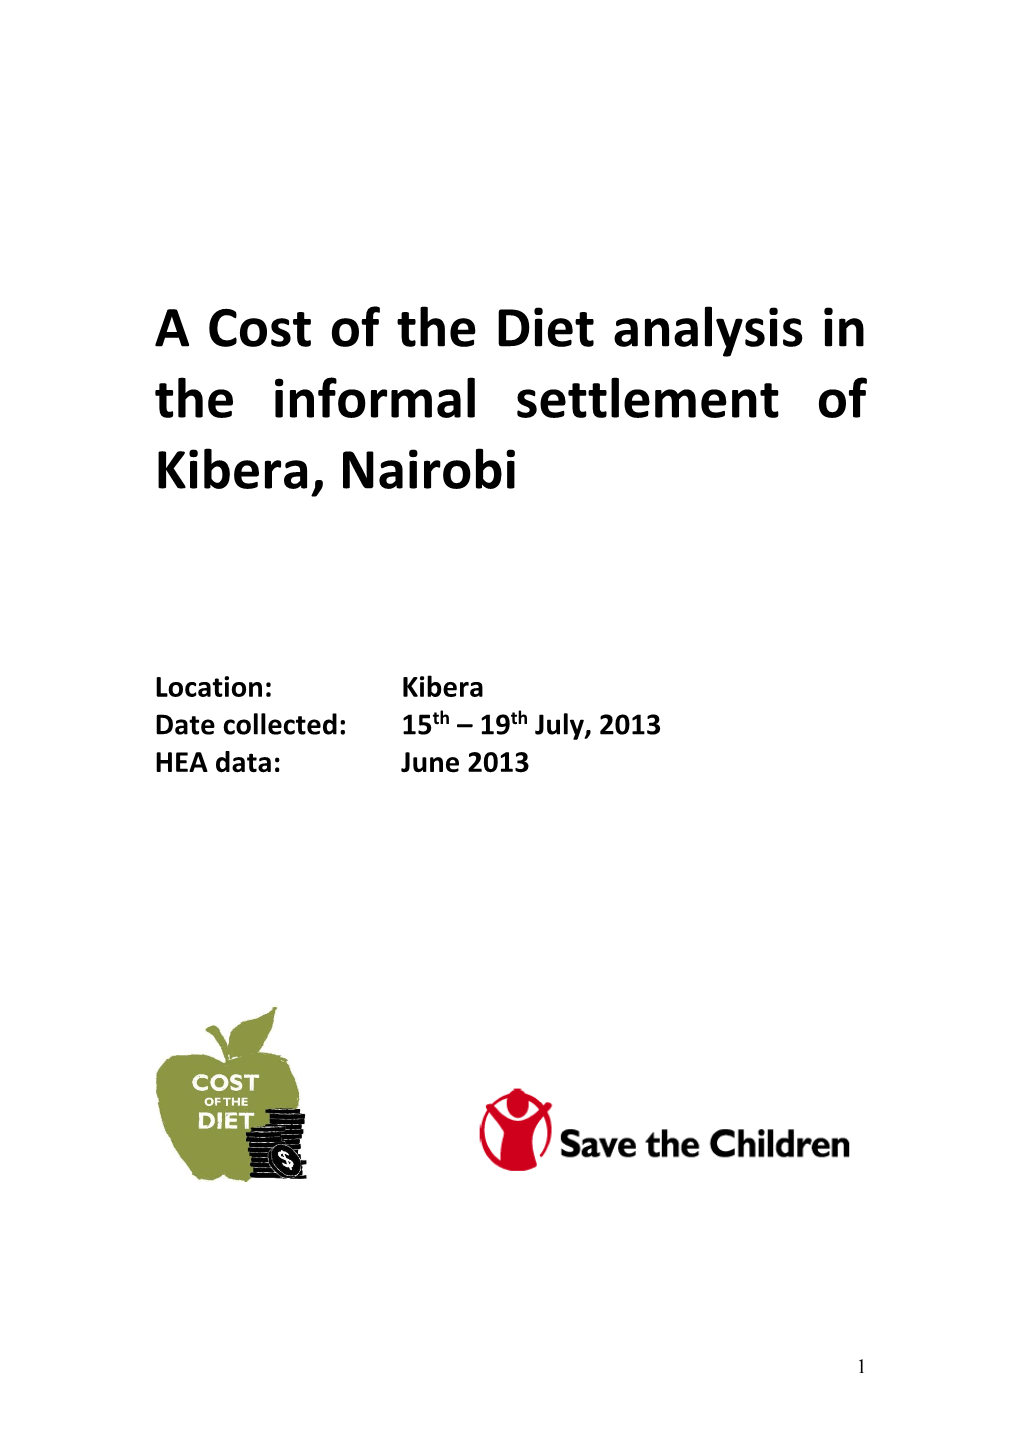 A Cost of the Diet Assessment for Kibera